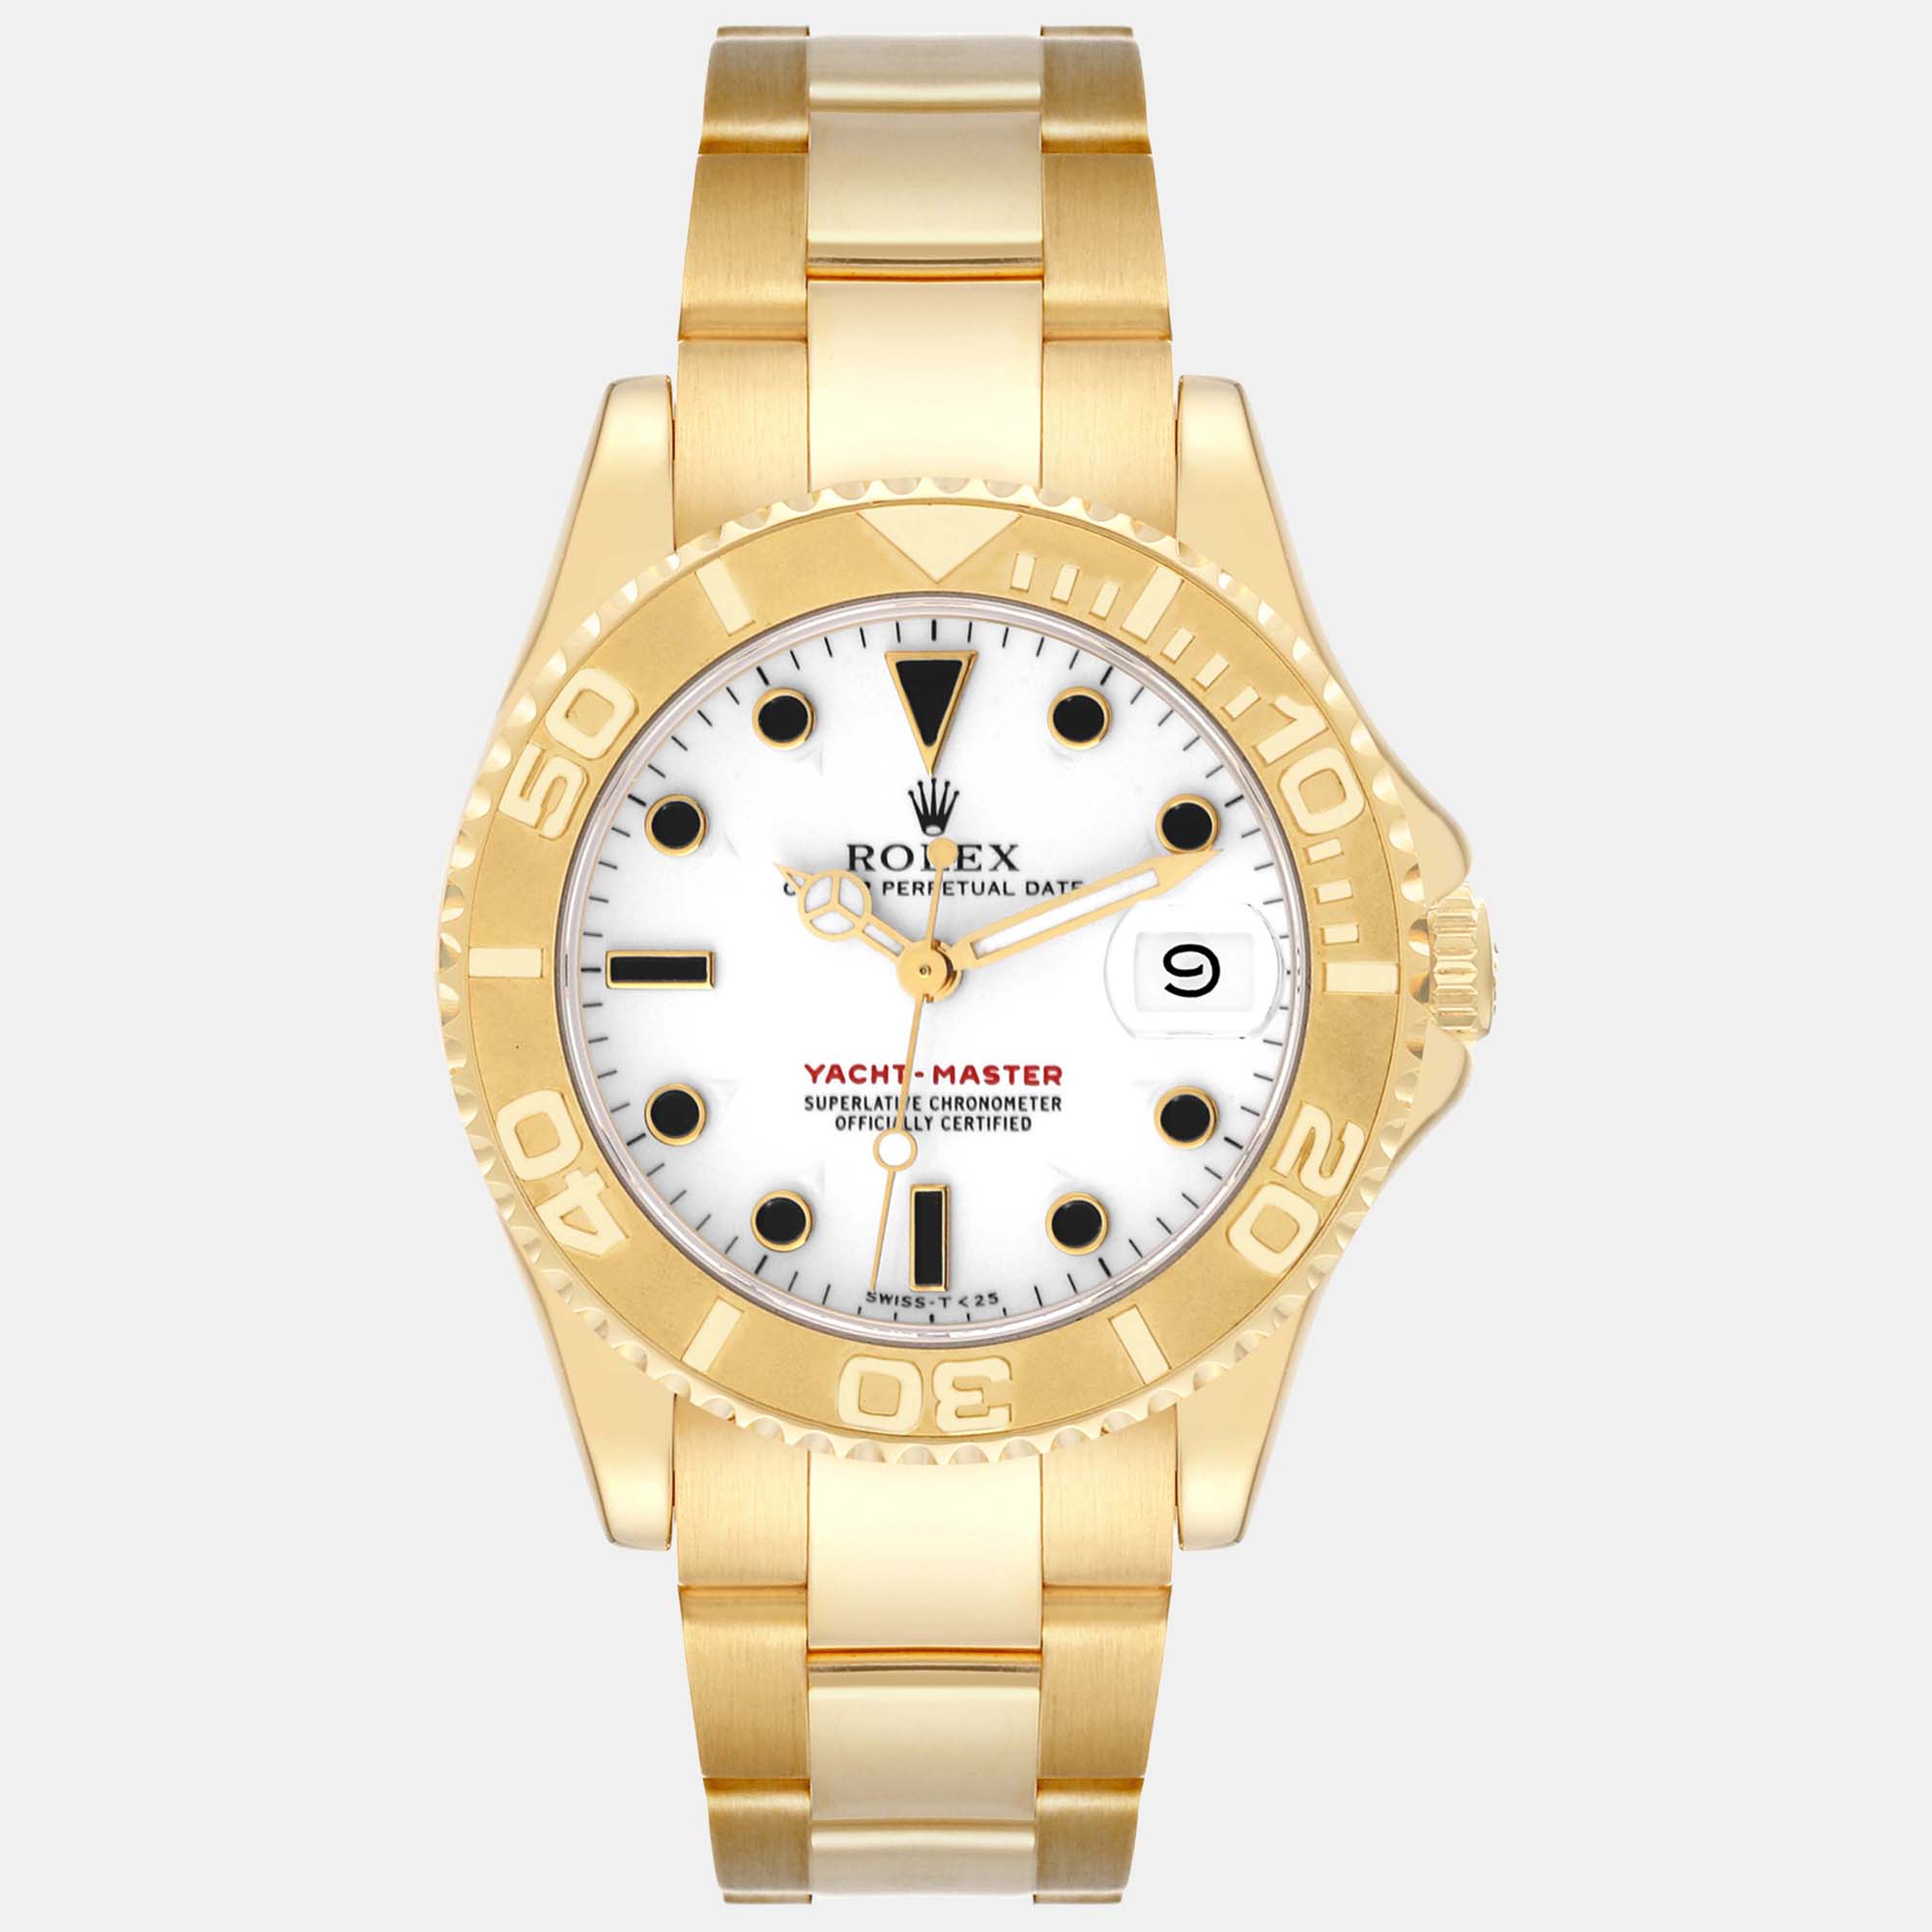 Rolex yachtmaster midsize yellow gold white dial men's watch 35.0 mm